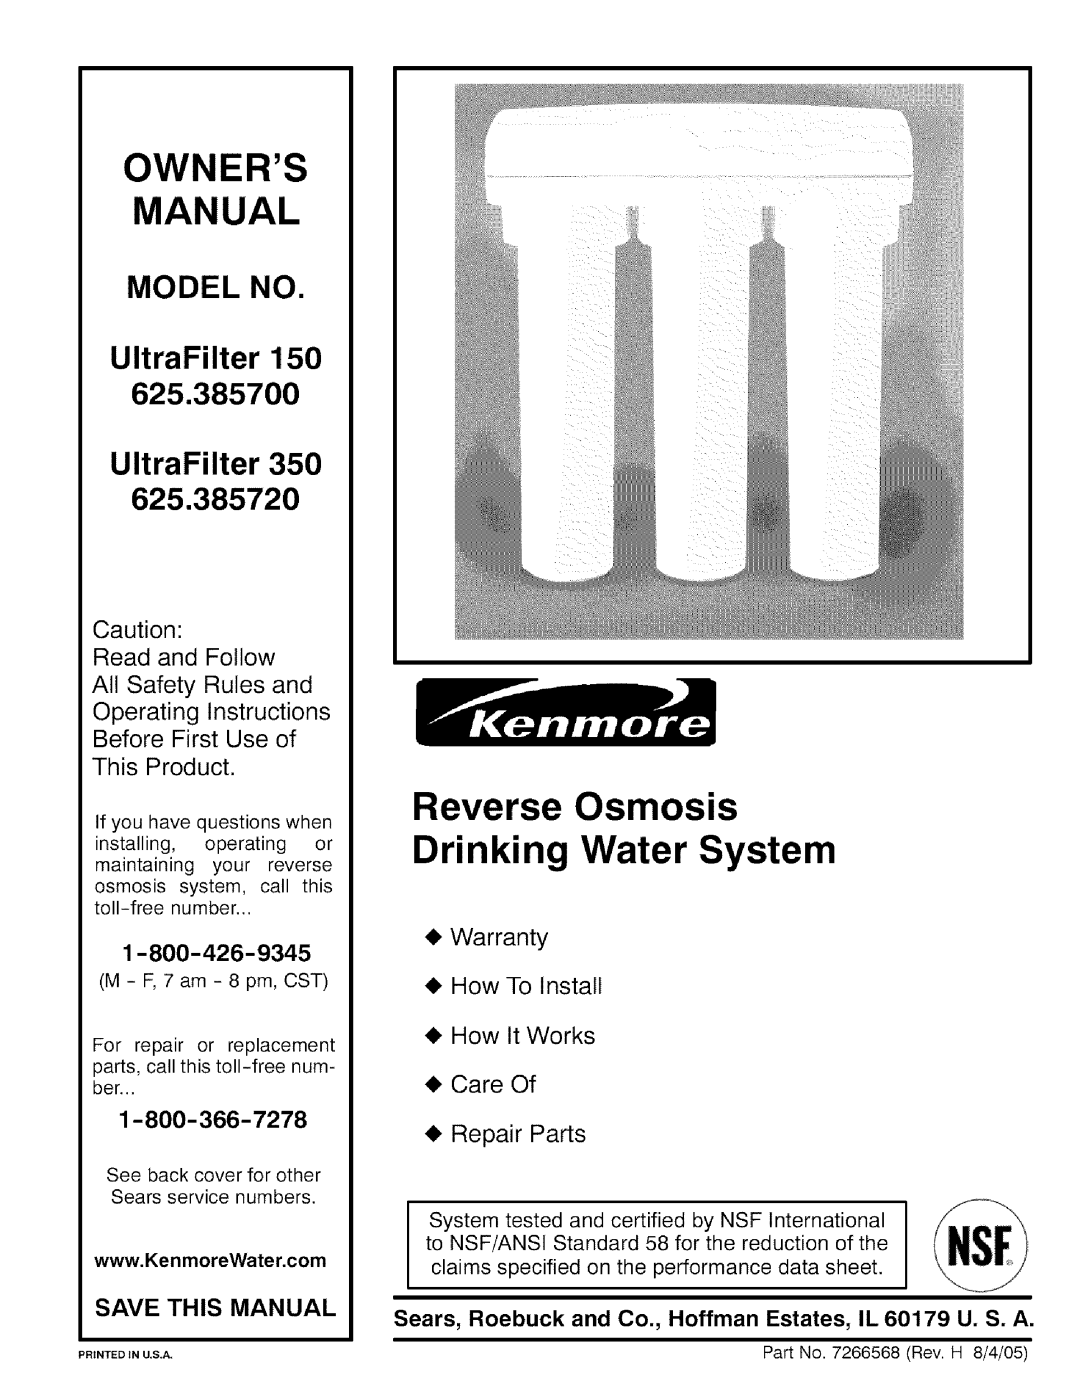 Kenmore 625.385720 owner manual Reverse Osmosis Drinking Water System, MODEL NO UltraFilter 150 UltraFilter, This Product 